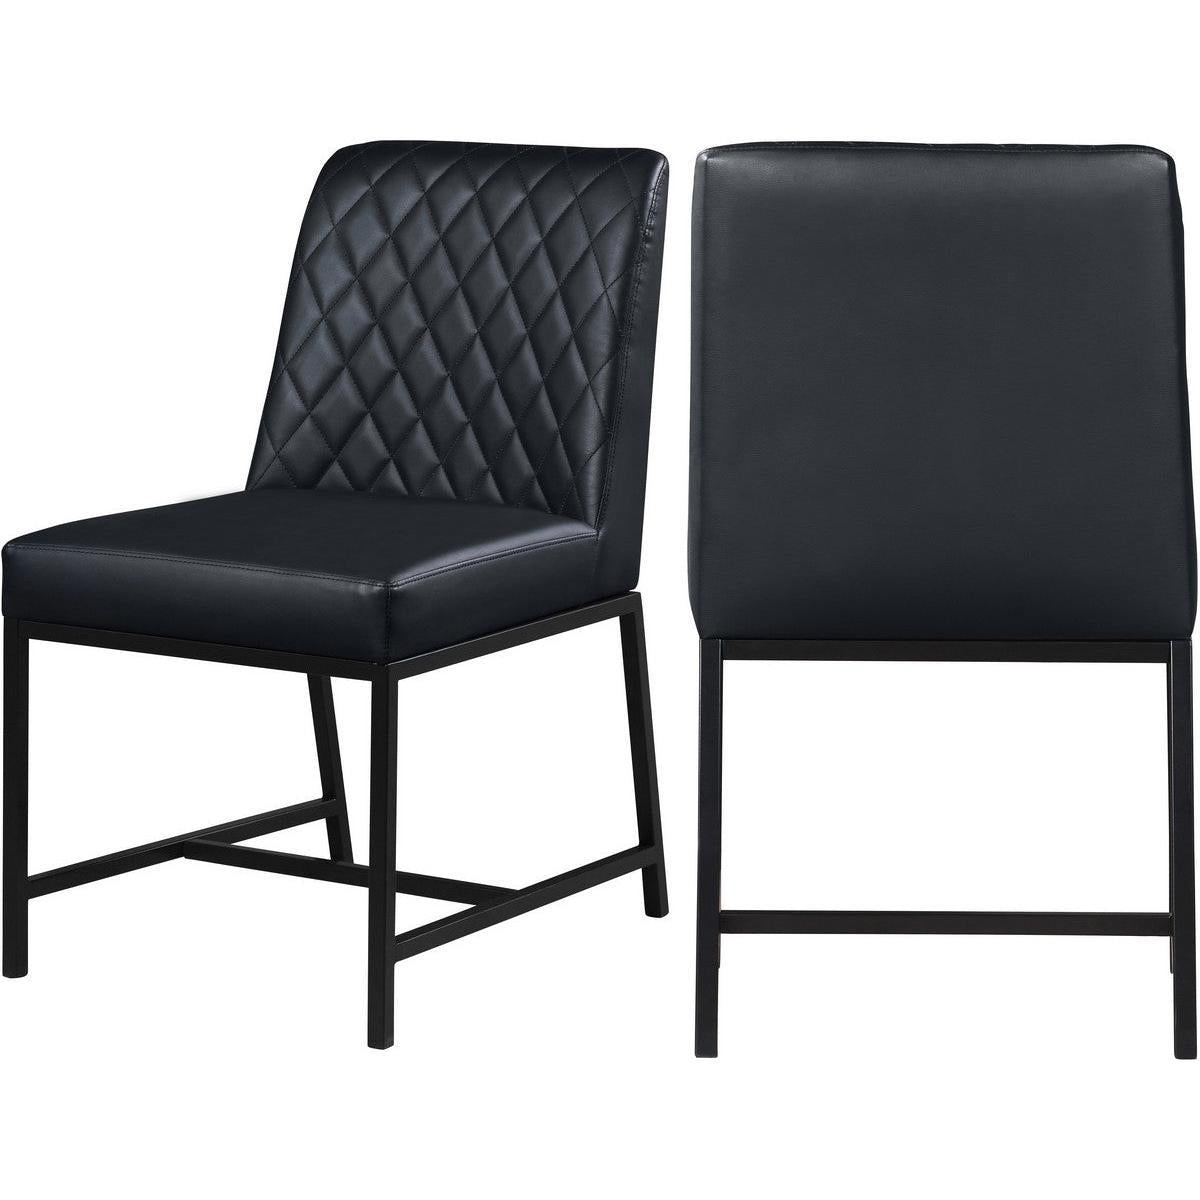 Meridian Furniture Bryce Black Faux Leather Dining ChairMeridian Furniture - Dining Chair - Minimal And Modern - 1